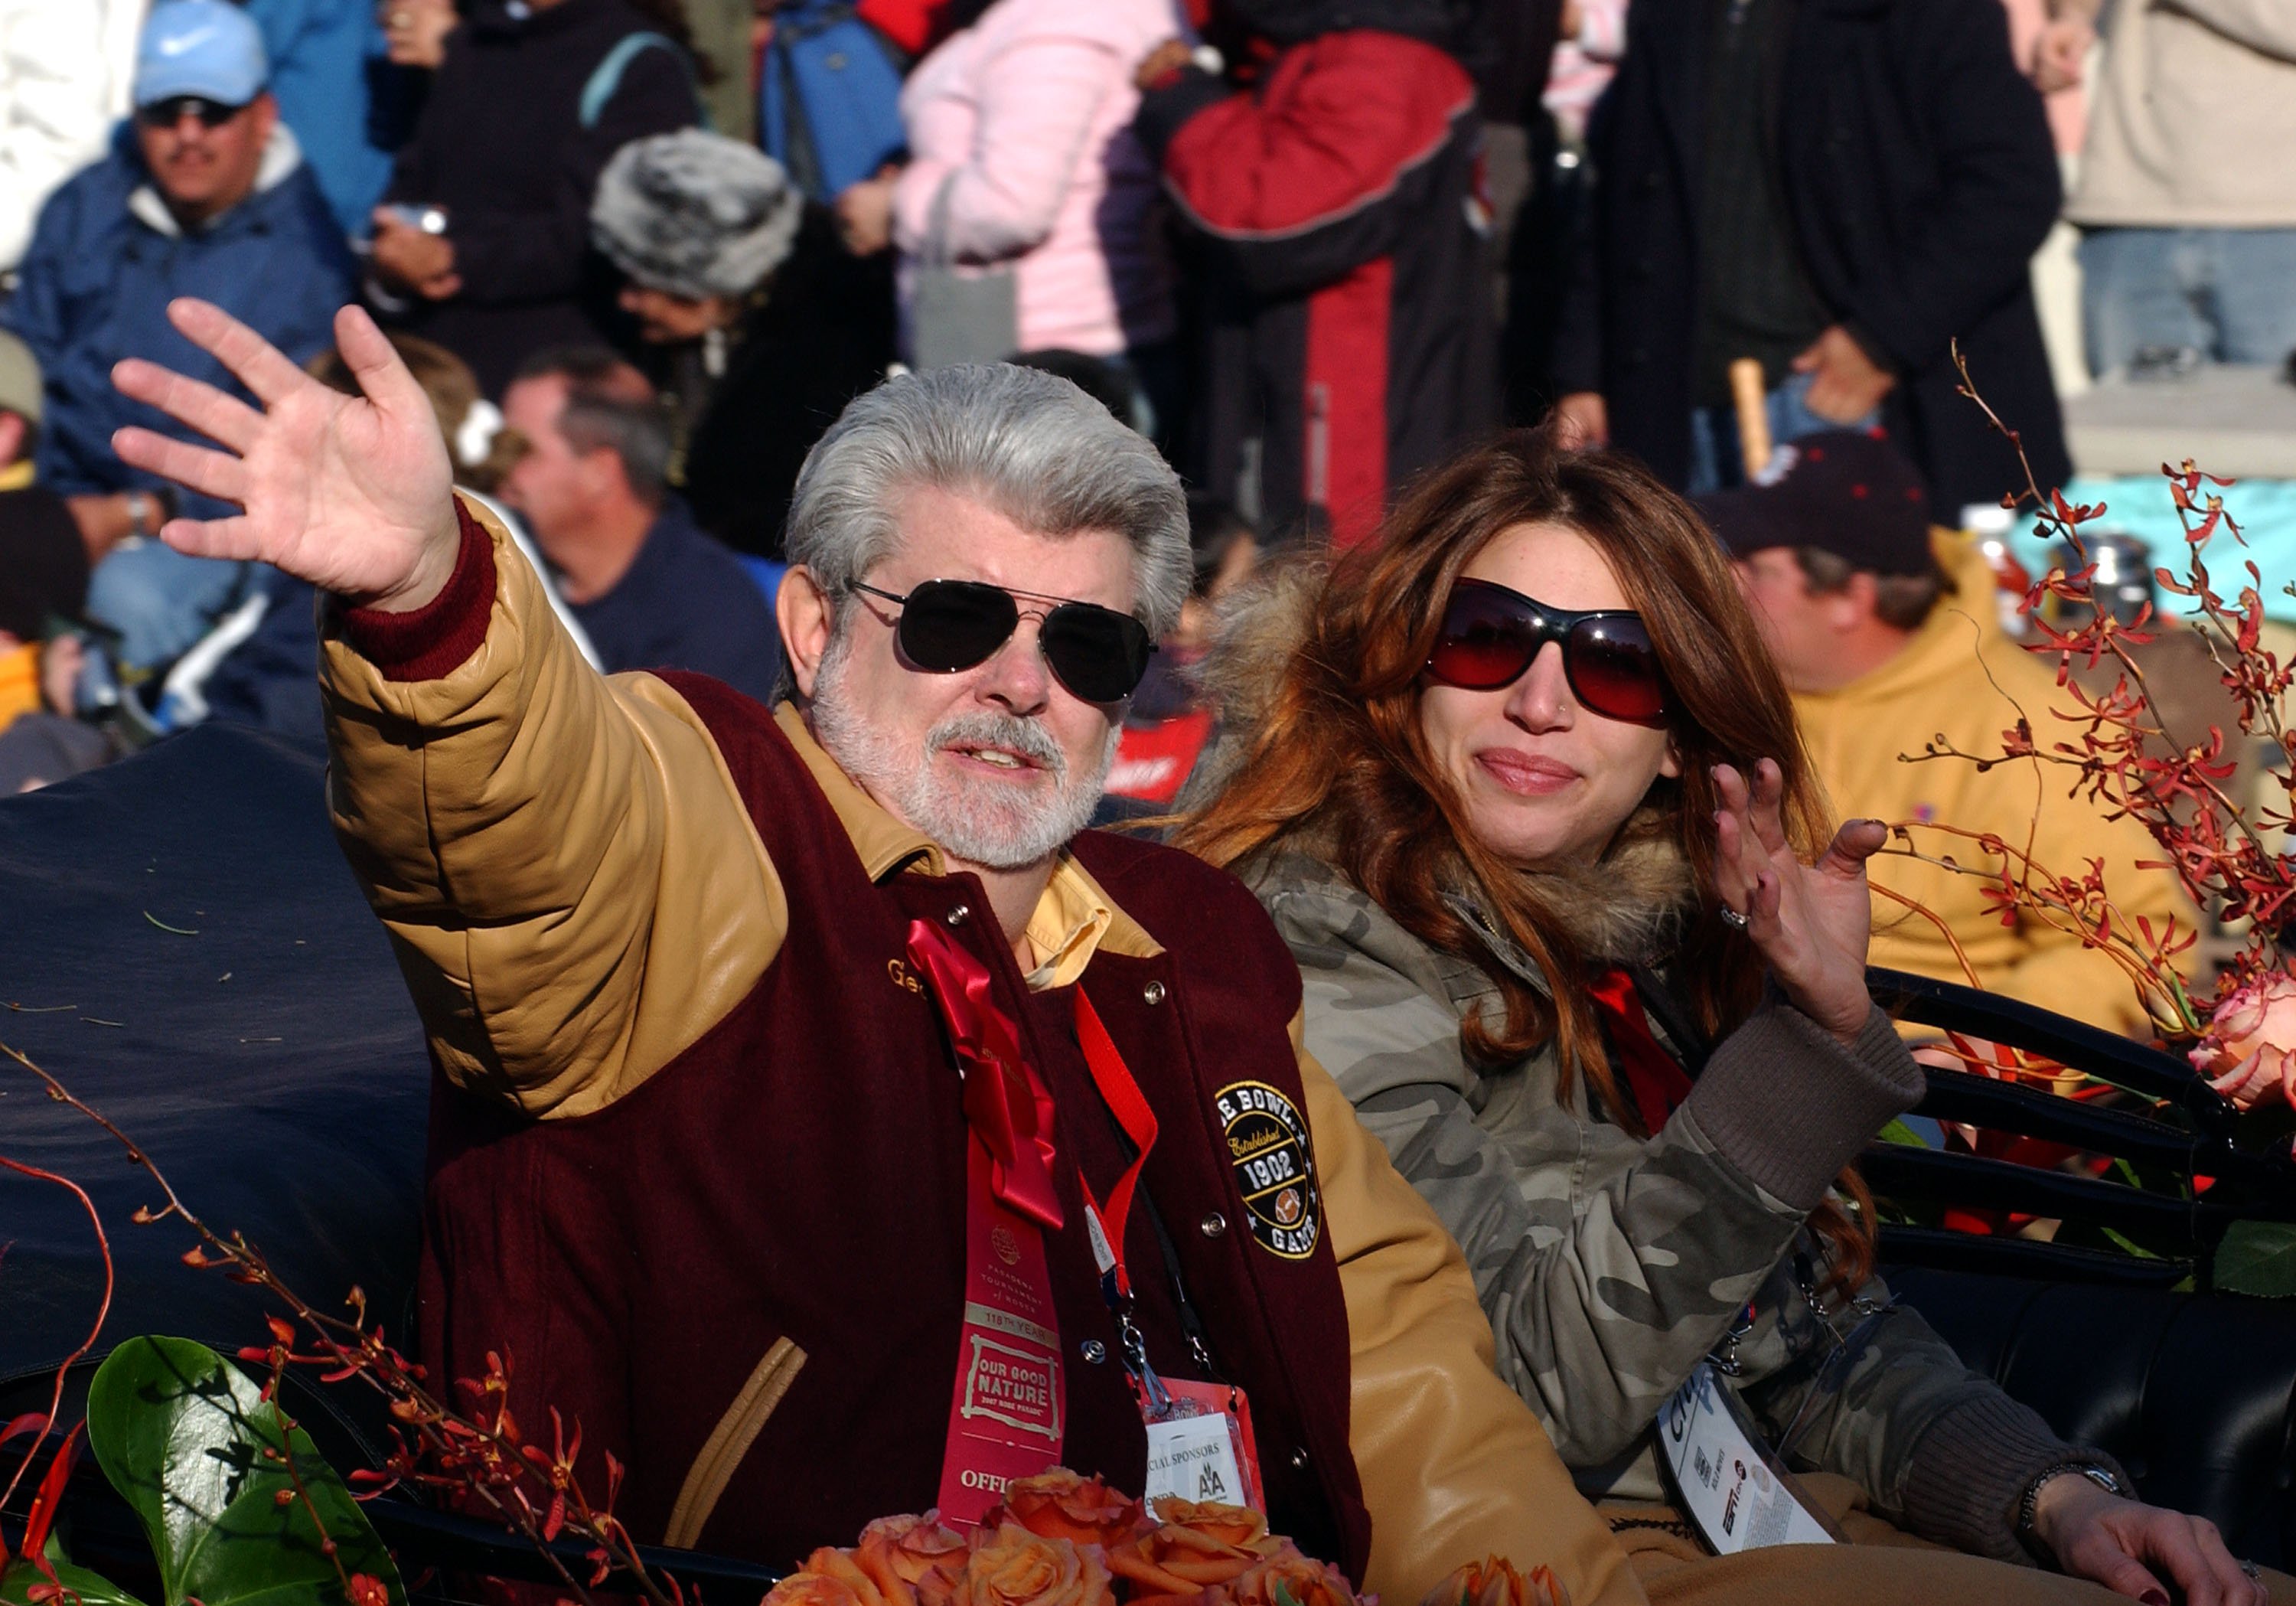 George Lucas and Amanda Lucas at the 118th Rose Parade "Our Good Nature" on January 1, 2007 | Source: Getty Images